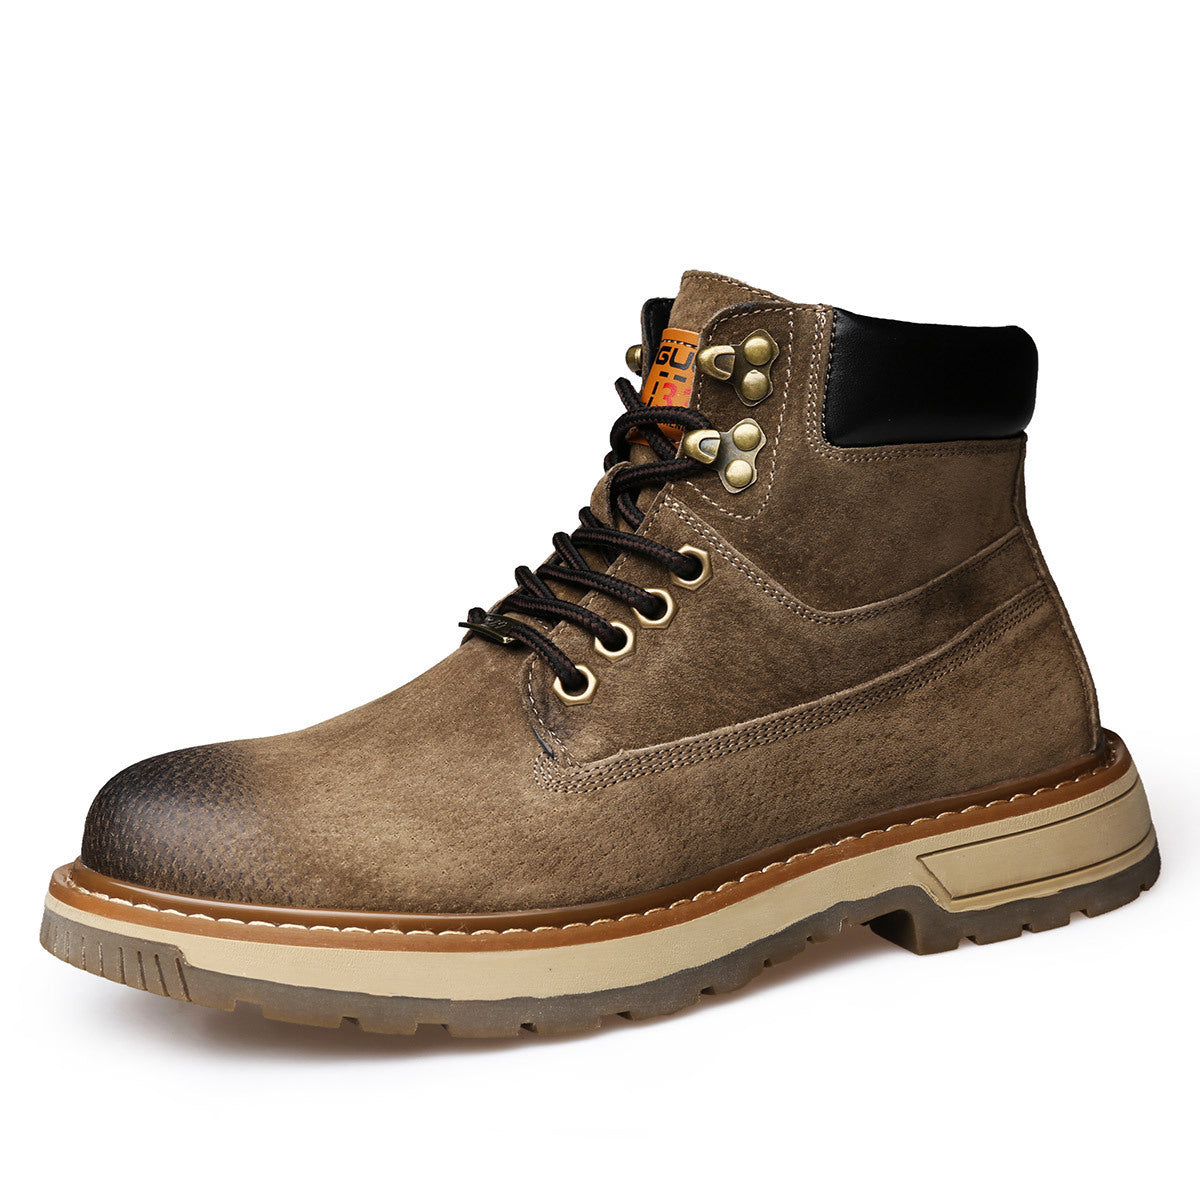 Men's Frosted Breathable Neri Martin Boots Shoes & Bags